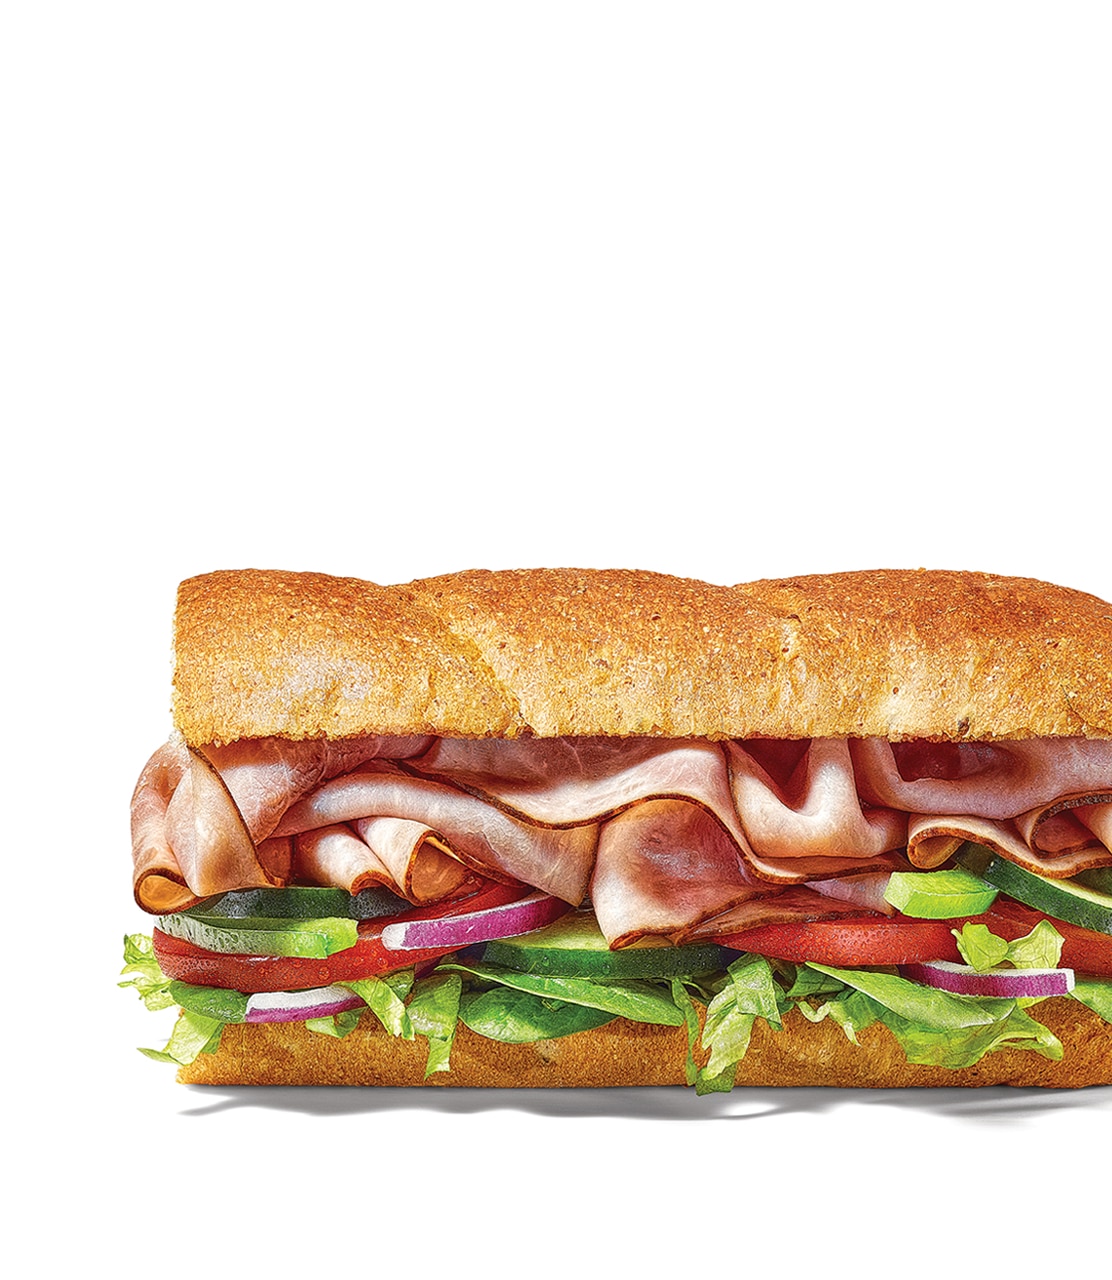 Calories in Subway Black Forest Ham six inch Sub